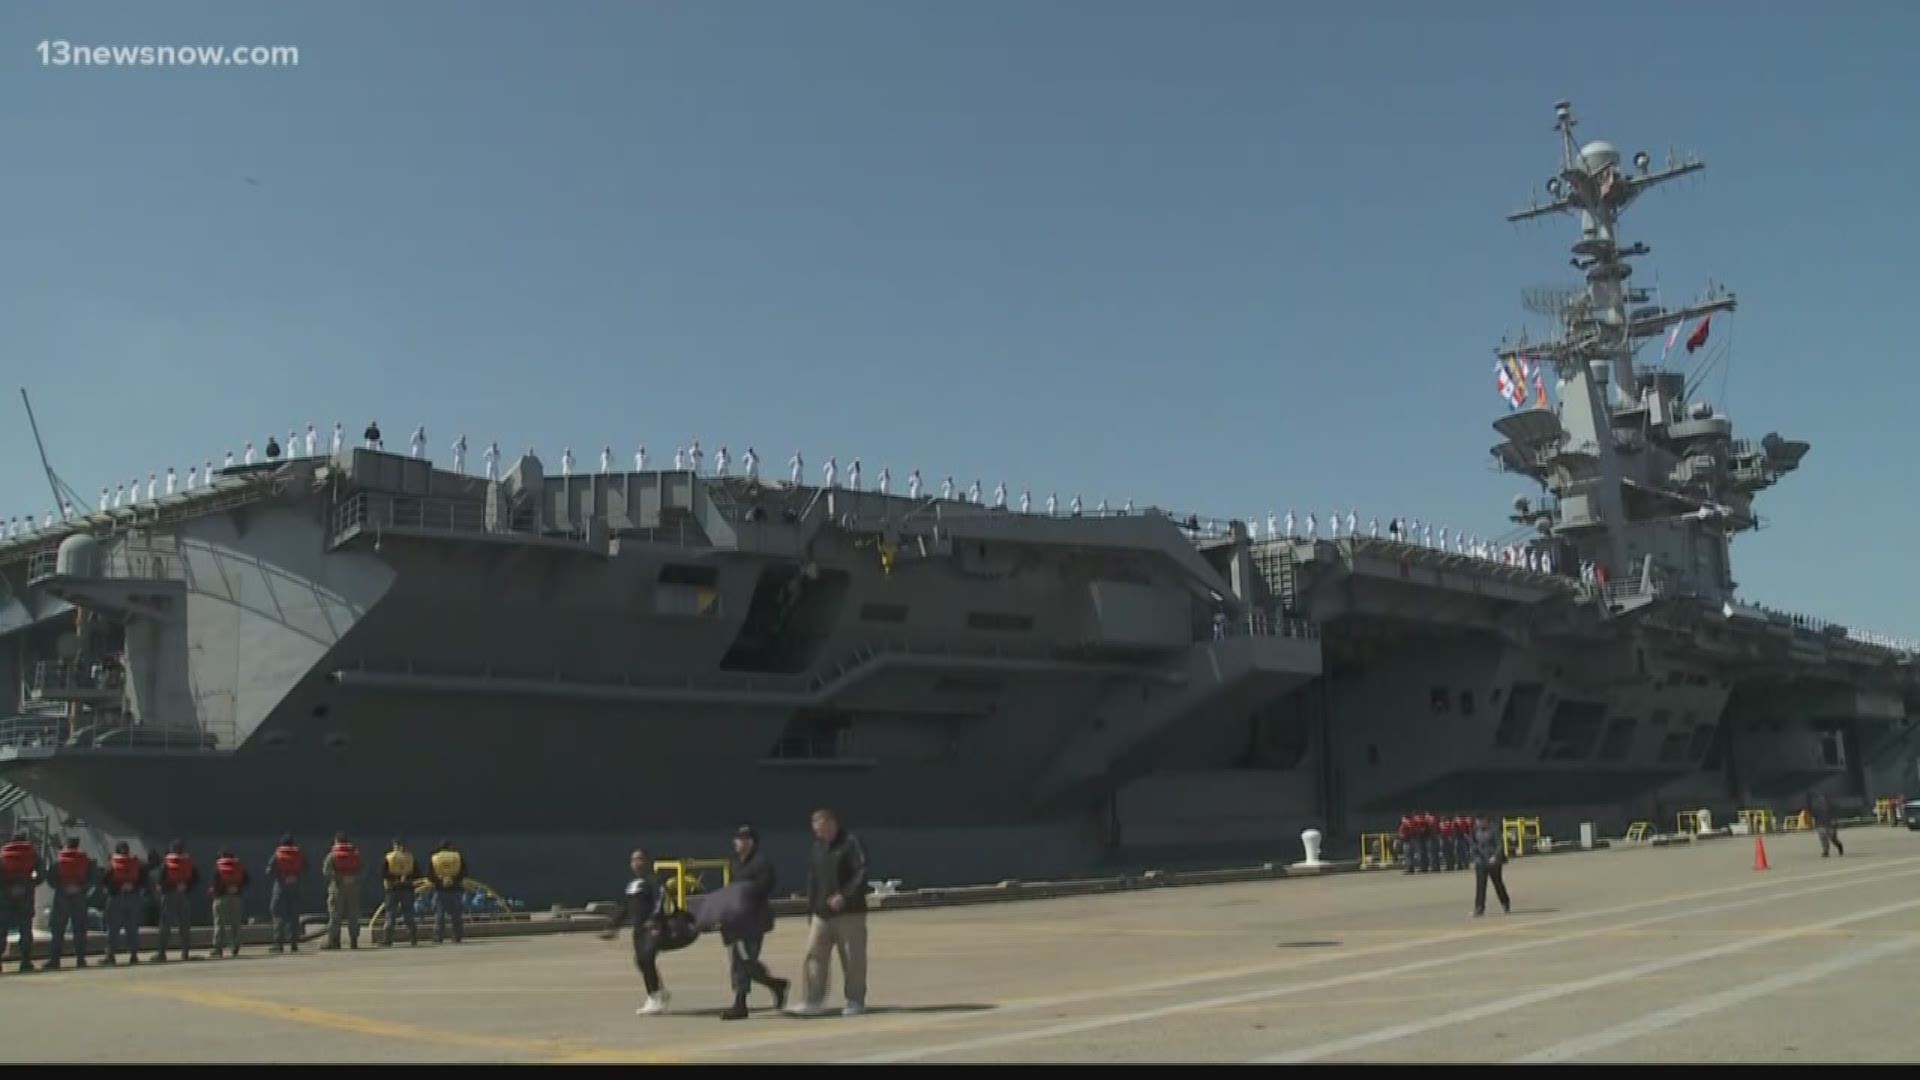 Thousands of sailors from the Harry S. Truman Carrier Strike Group deployed Wednesday.